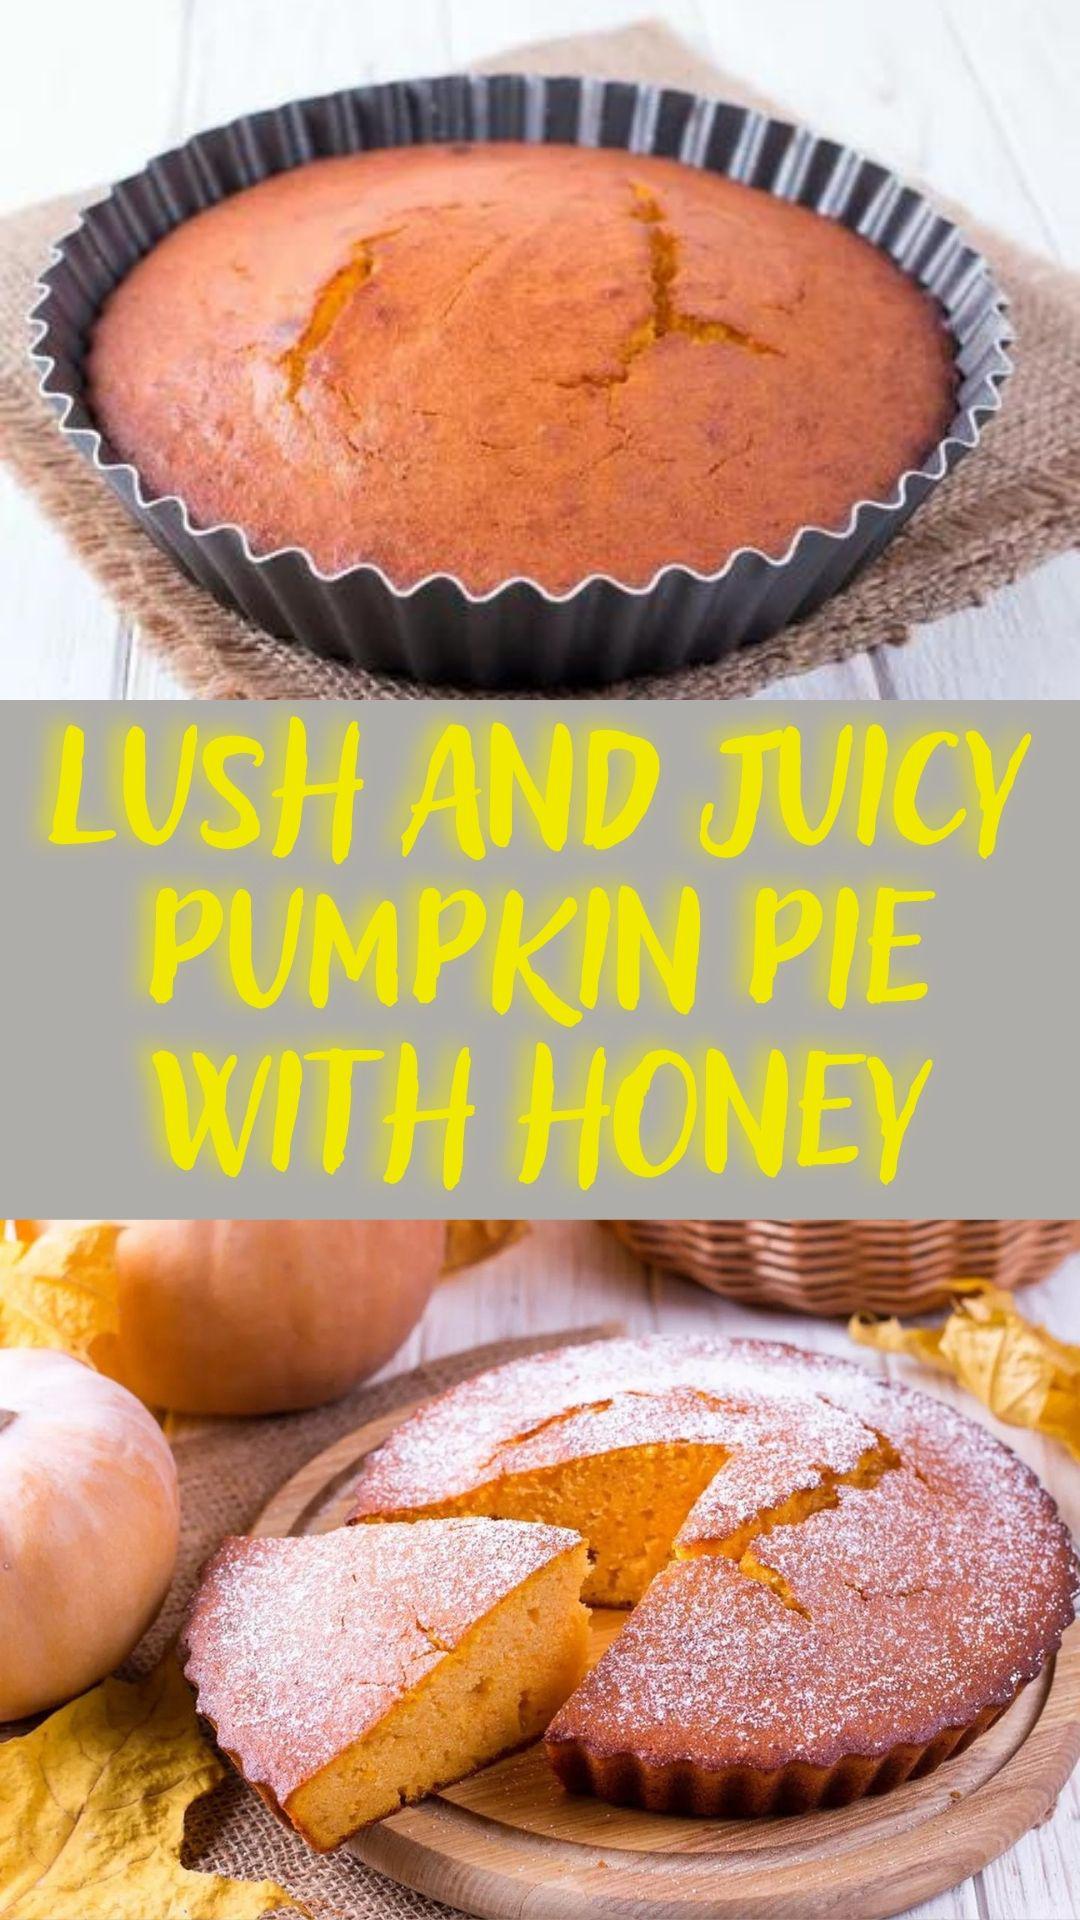 Lush and Juicy Pumpkin Pie with Honey